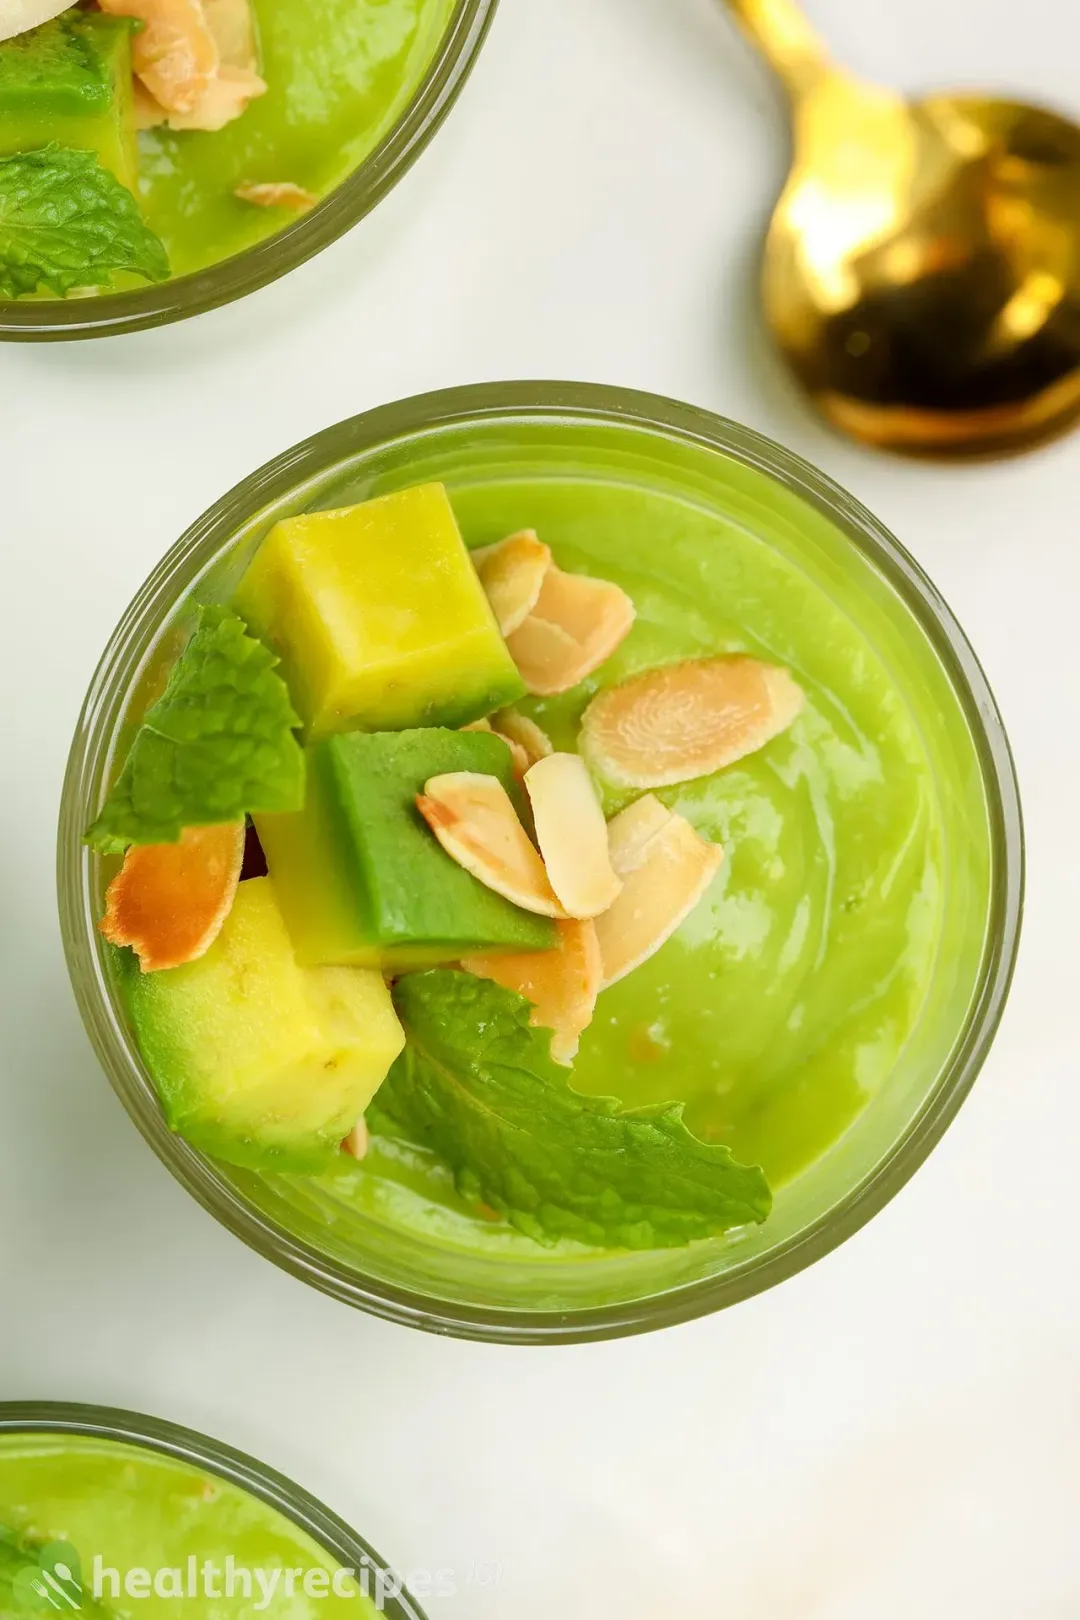 What Does Avocado Mousse Taste Like